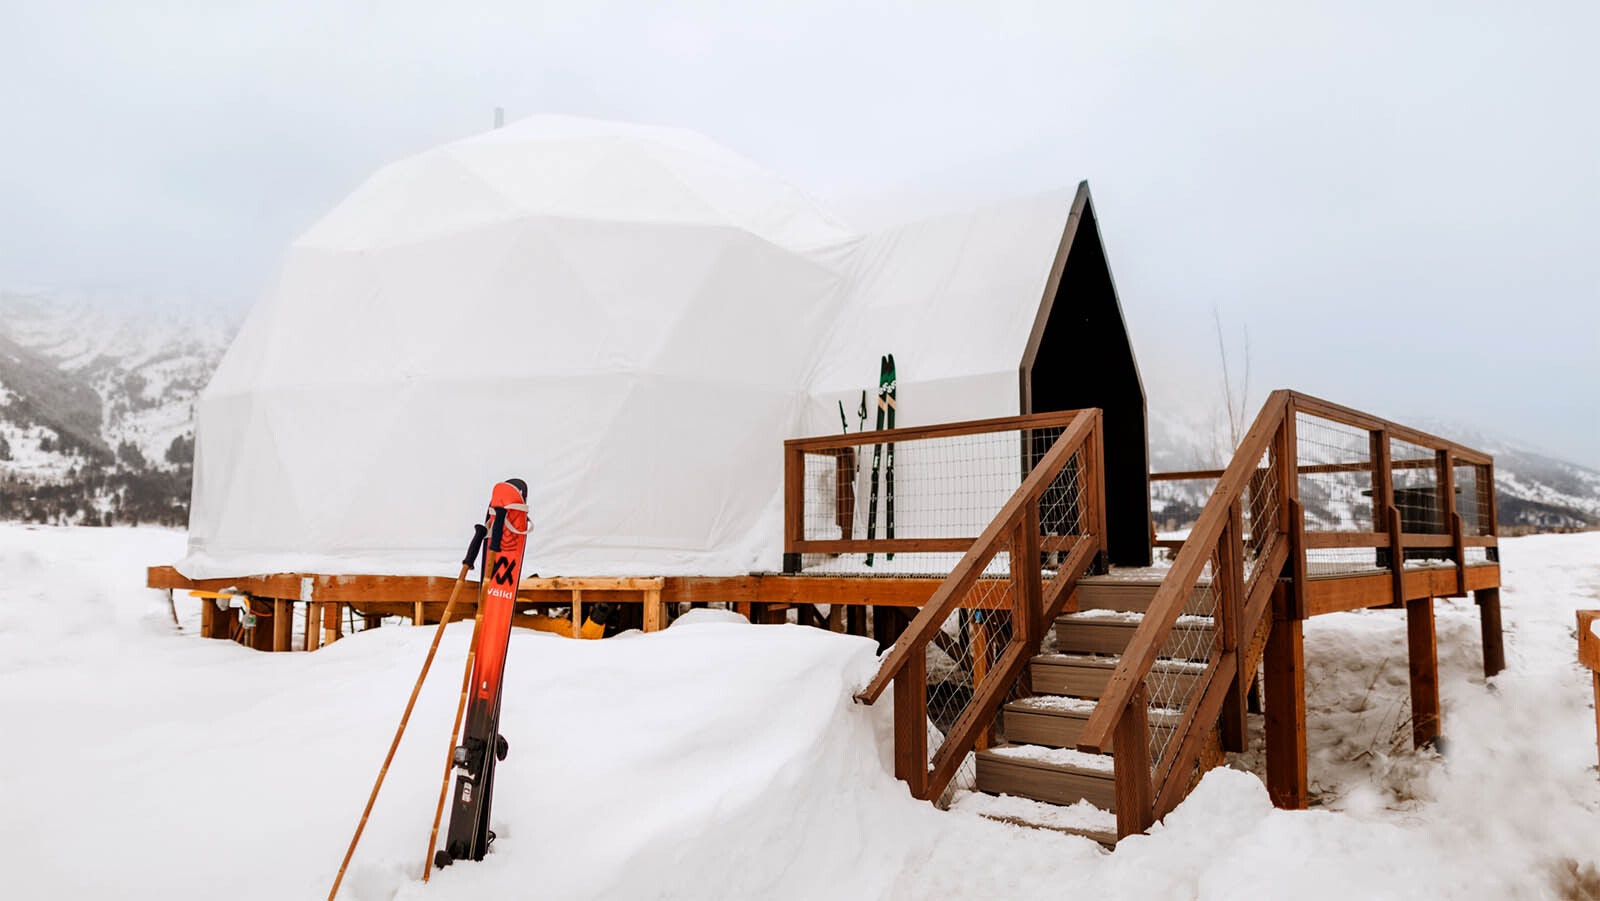 Geodesic domes covered in white provide a luxurious camping experience.